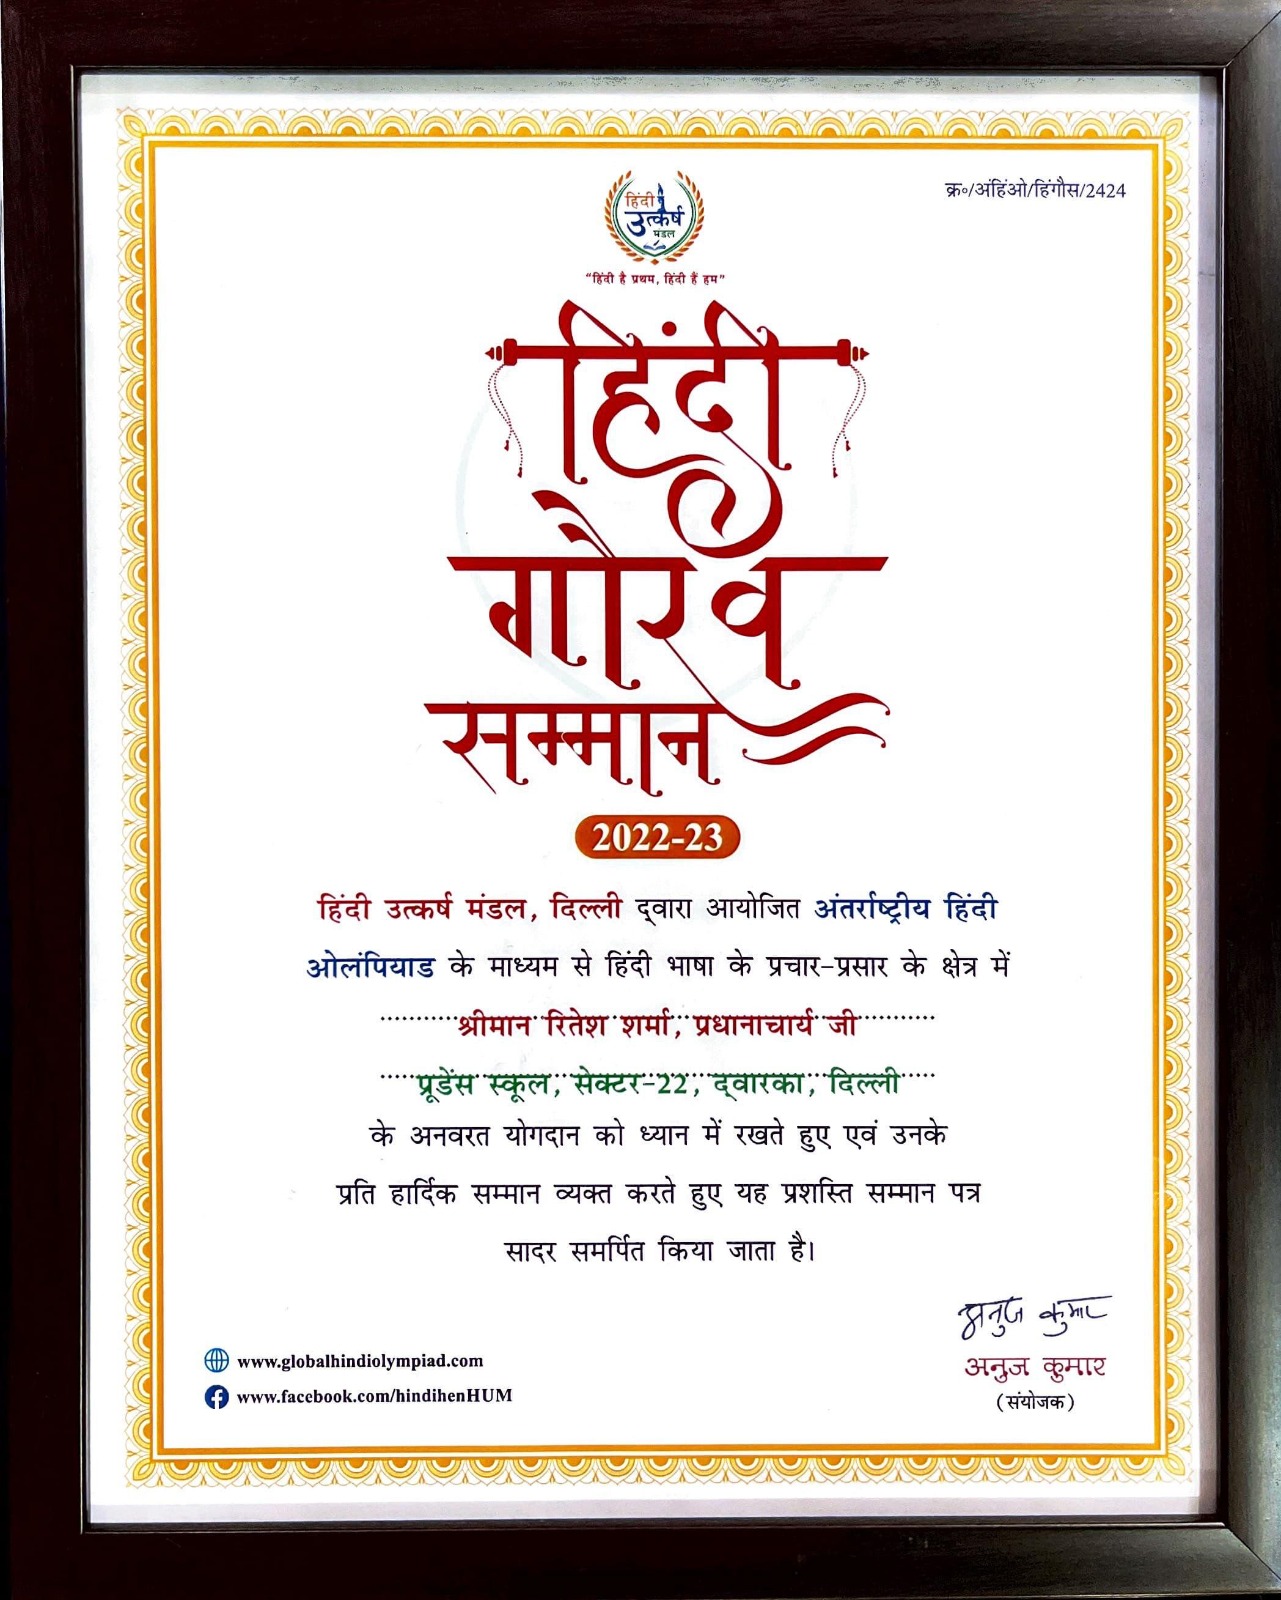 Mr. Ritesh Sharma, Principal of Prudence School, Sector-22, Dwarka, Delhi, is bestowed with a commendation certificate